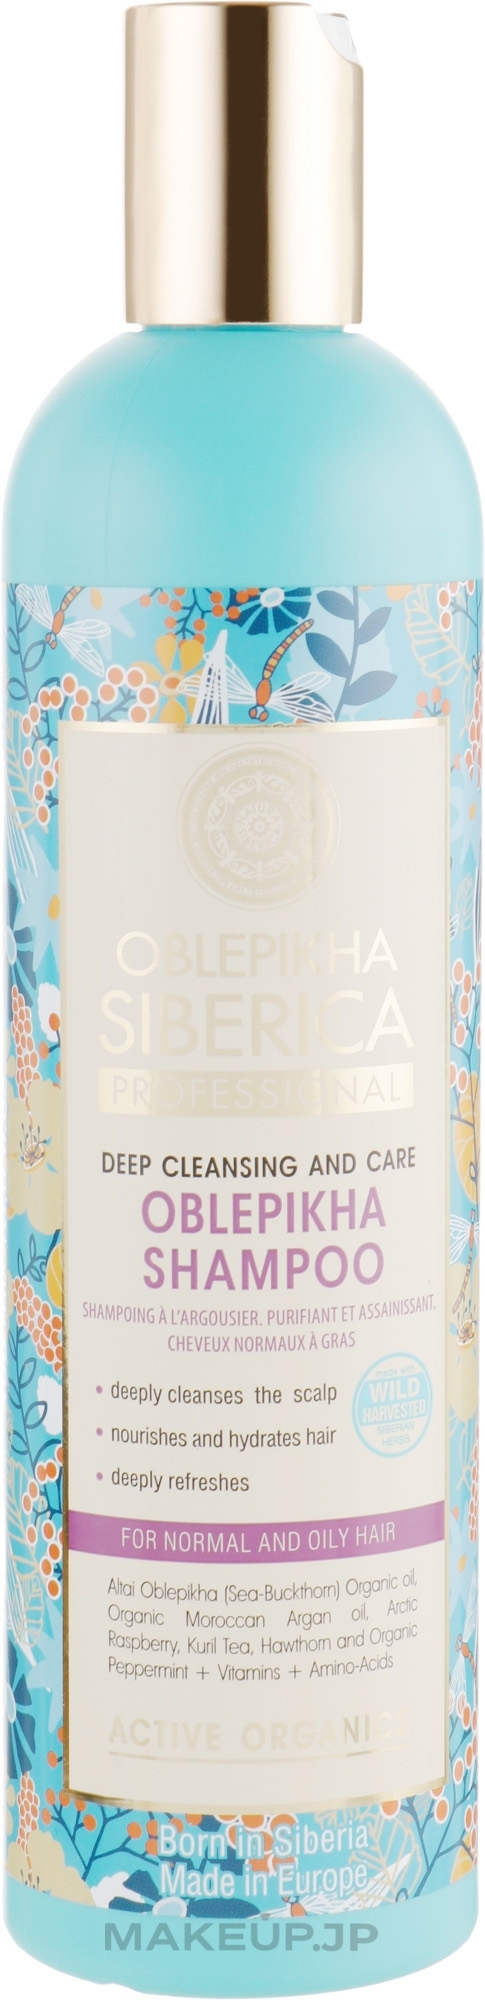 Normal and Oily Hair Sea Buckthorn Shampoo "Deep Cleansing and Care" - Natura Siberica — photo 400 ml